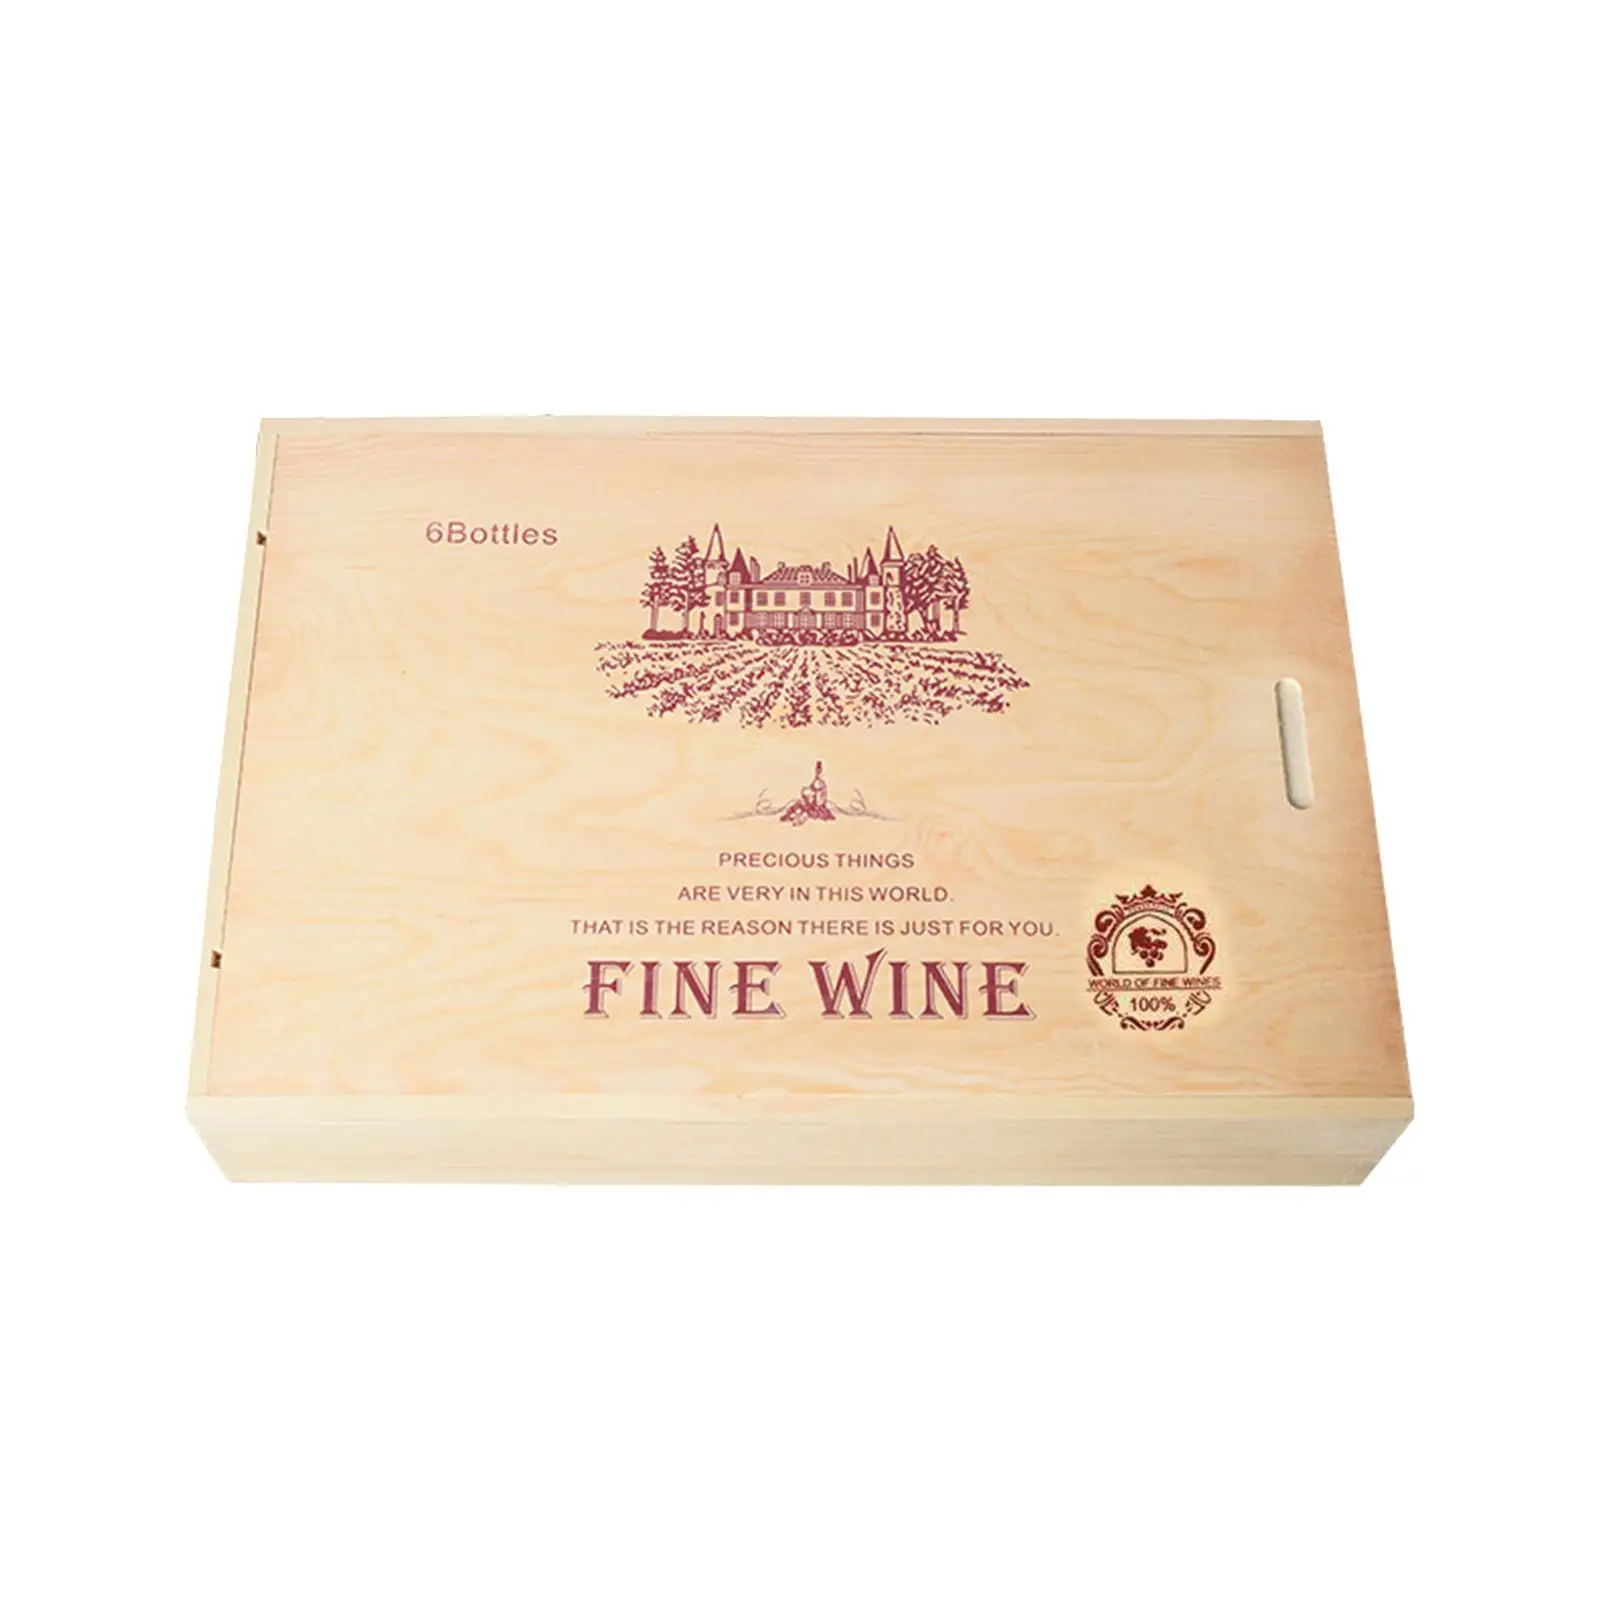 Wine Bottle Holder Gift Box Decorative Wine Carrier Wood Storage Gift Box for Celebrations Birthday Holiday Anniversary Party